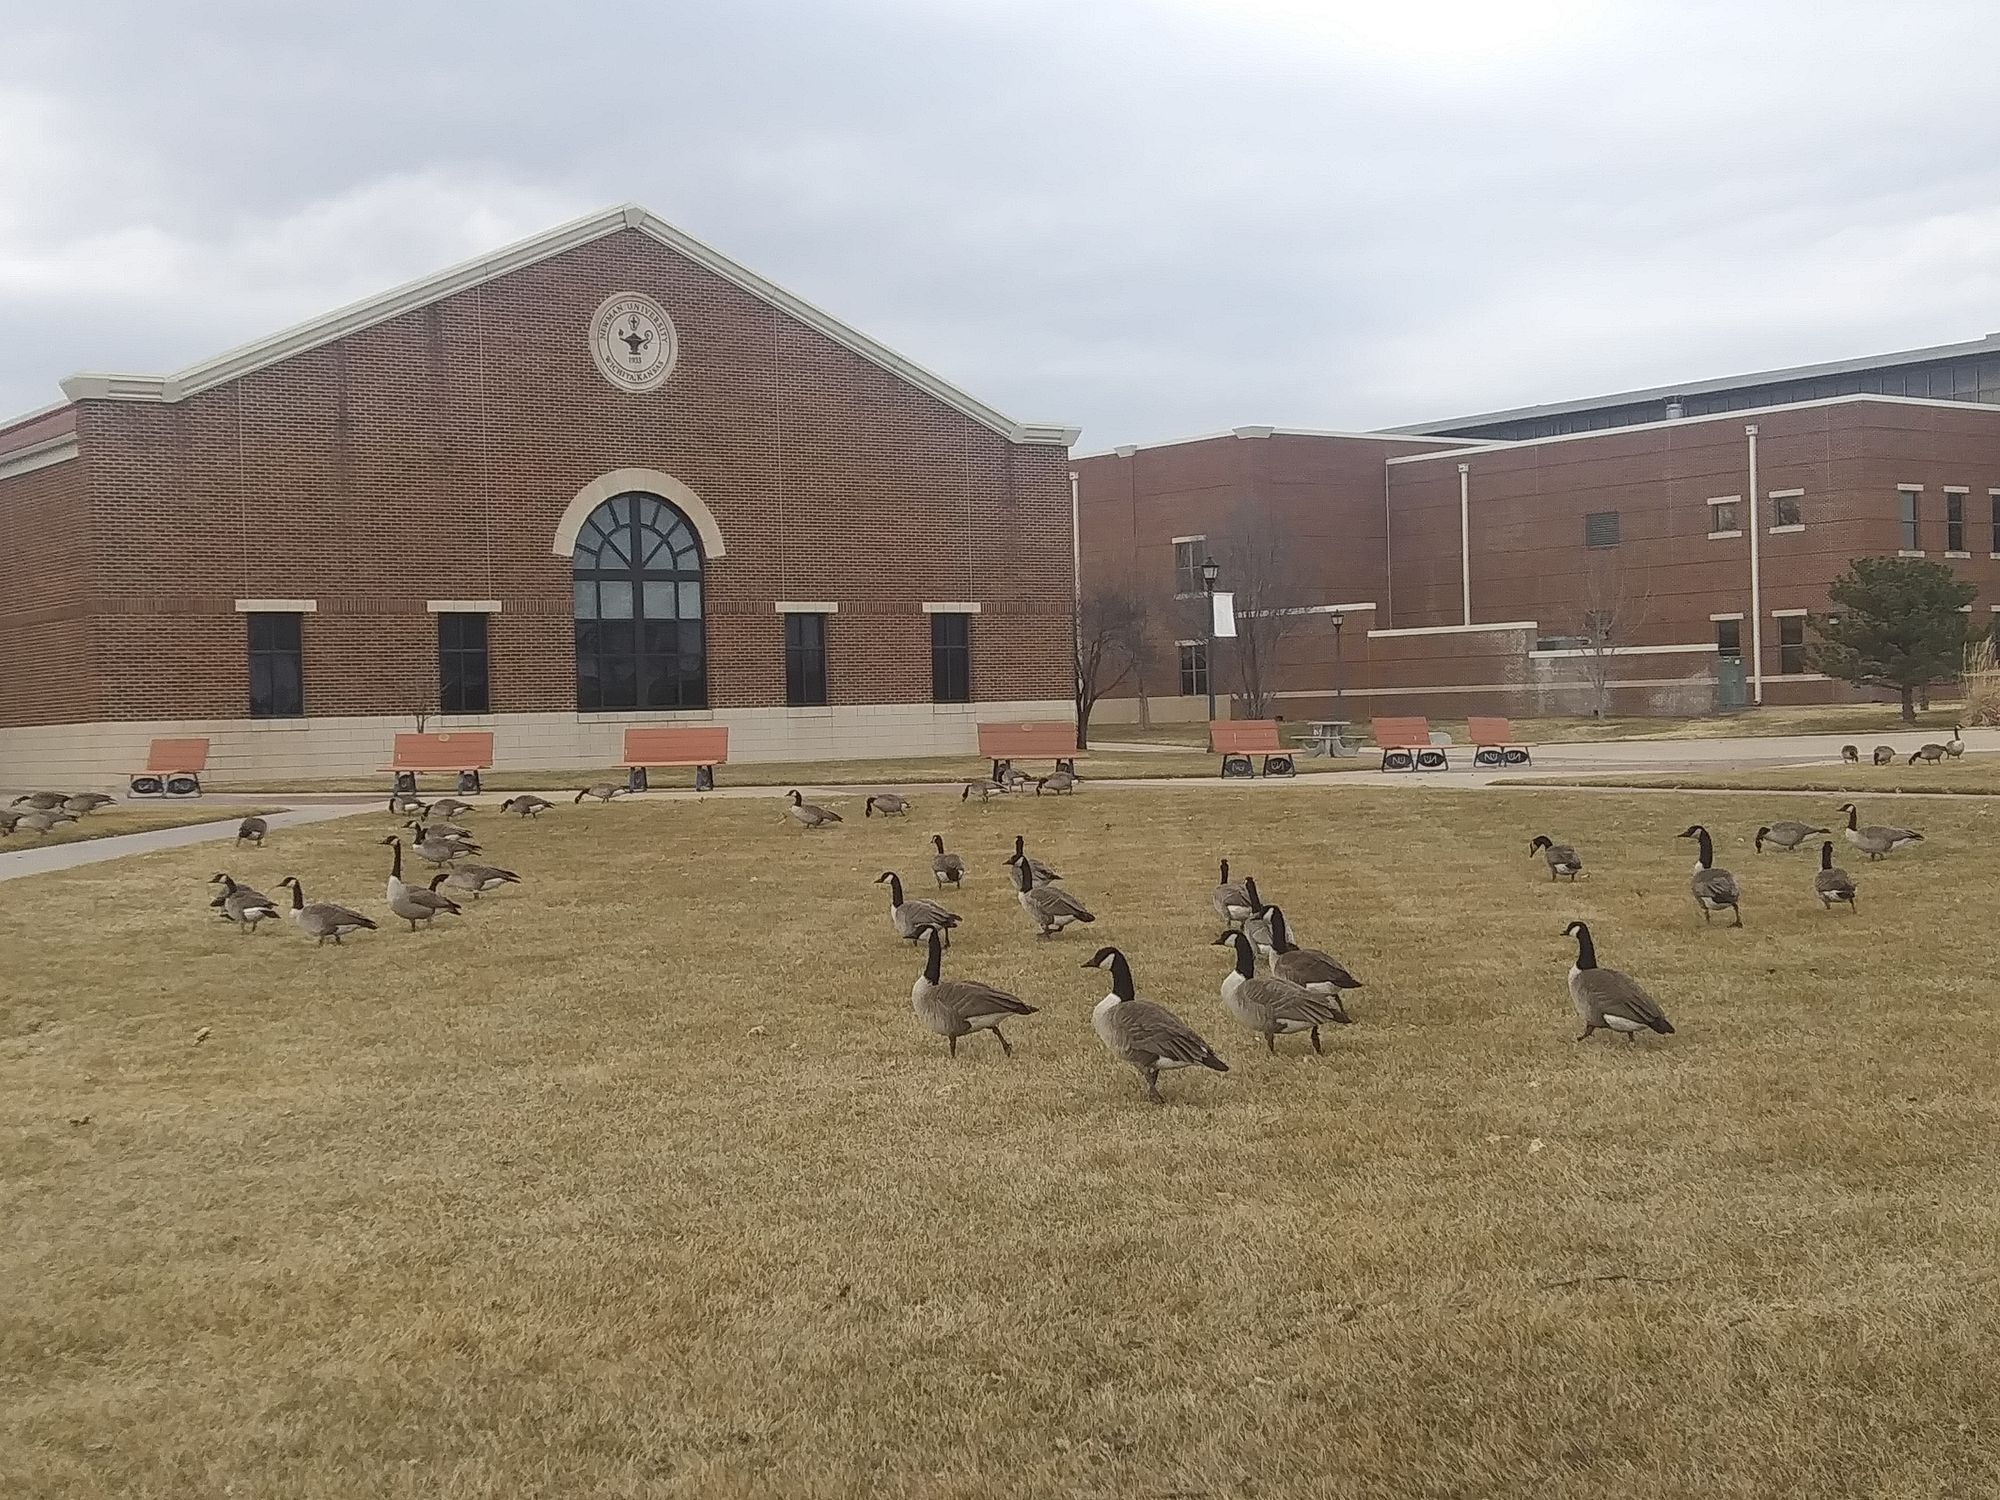 Geese’s presence wanted despite unwanted presents